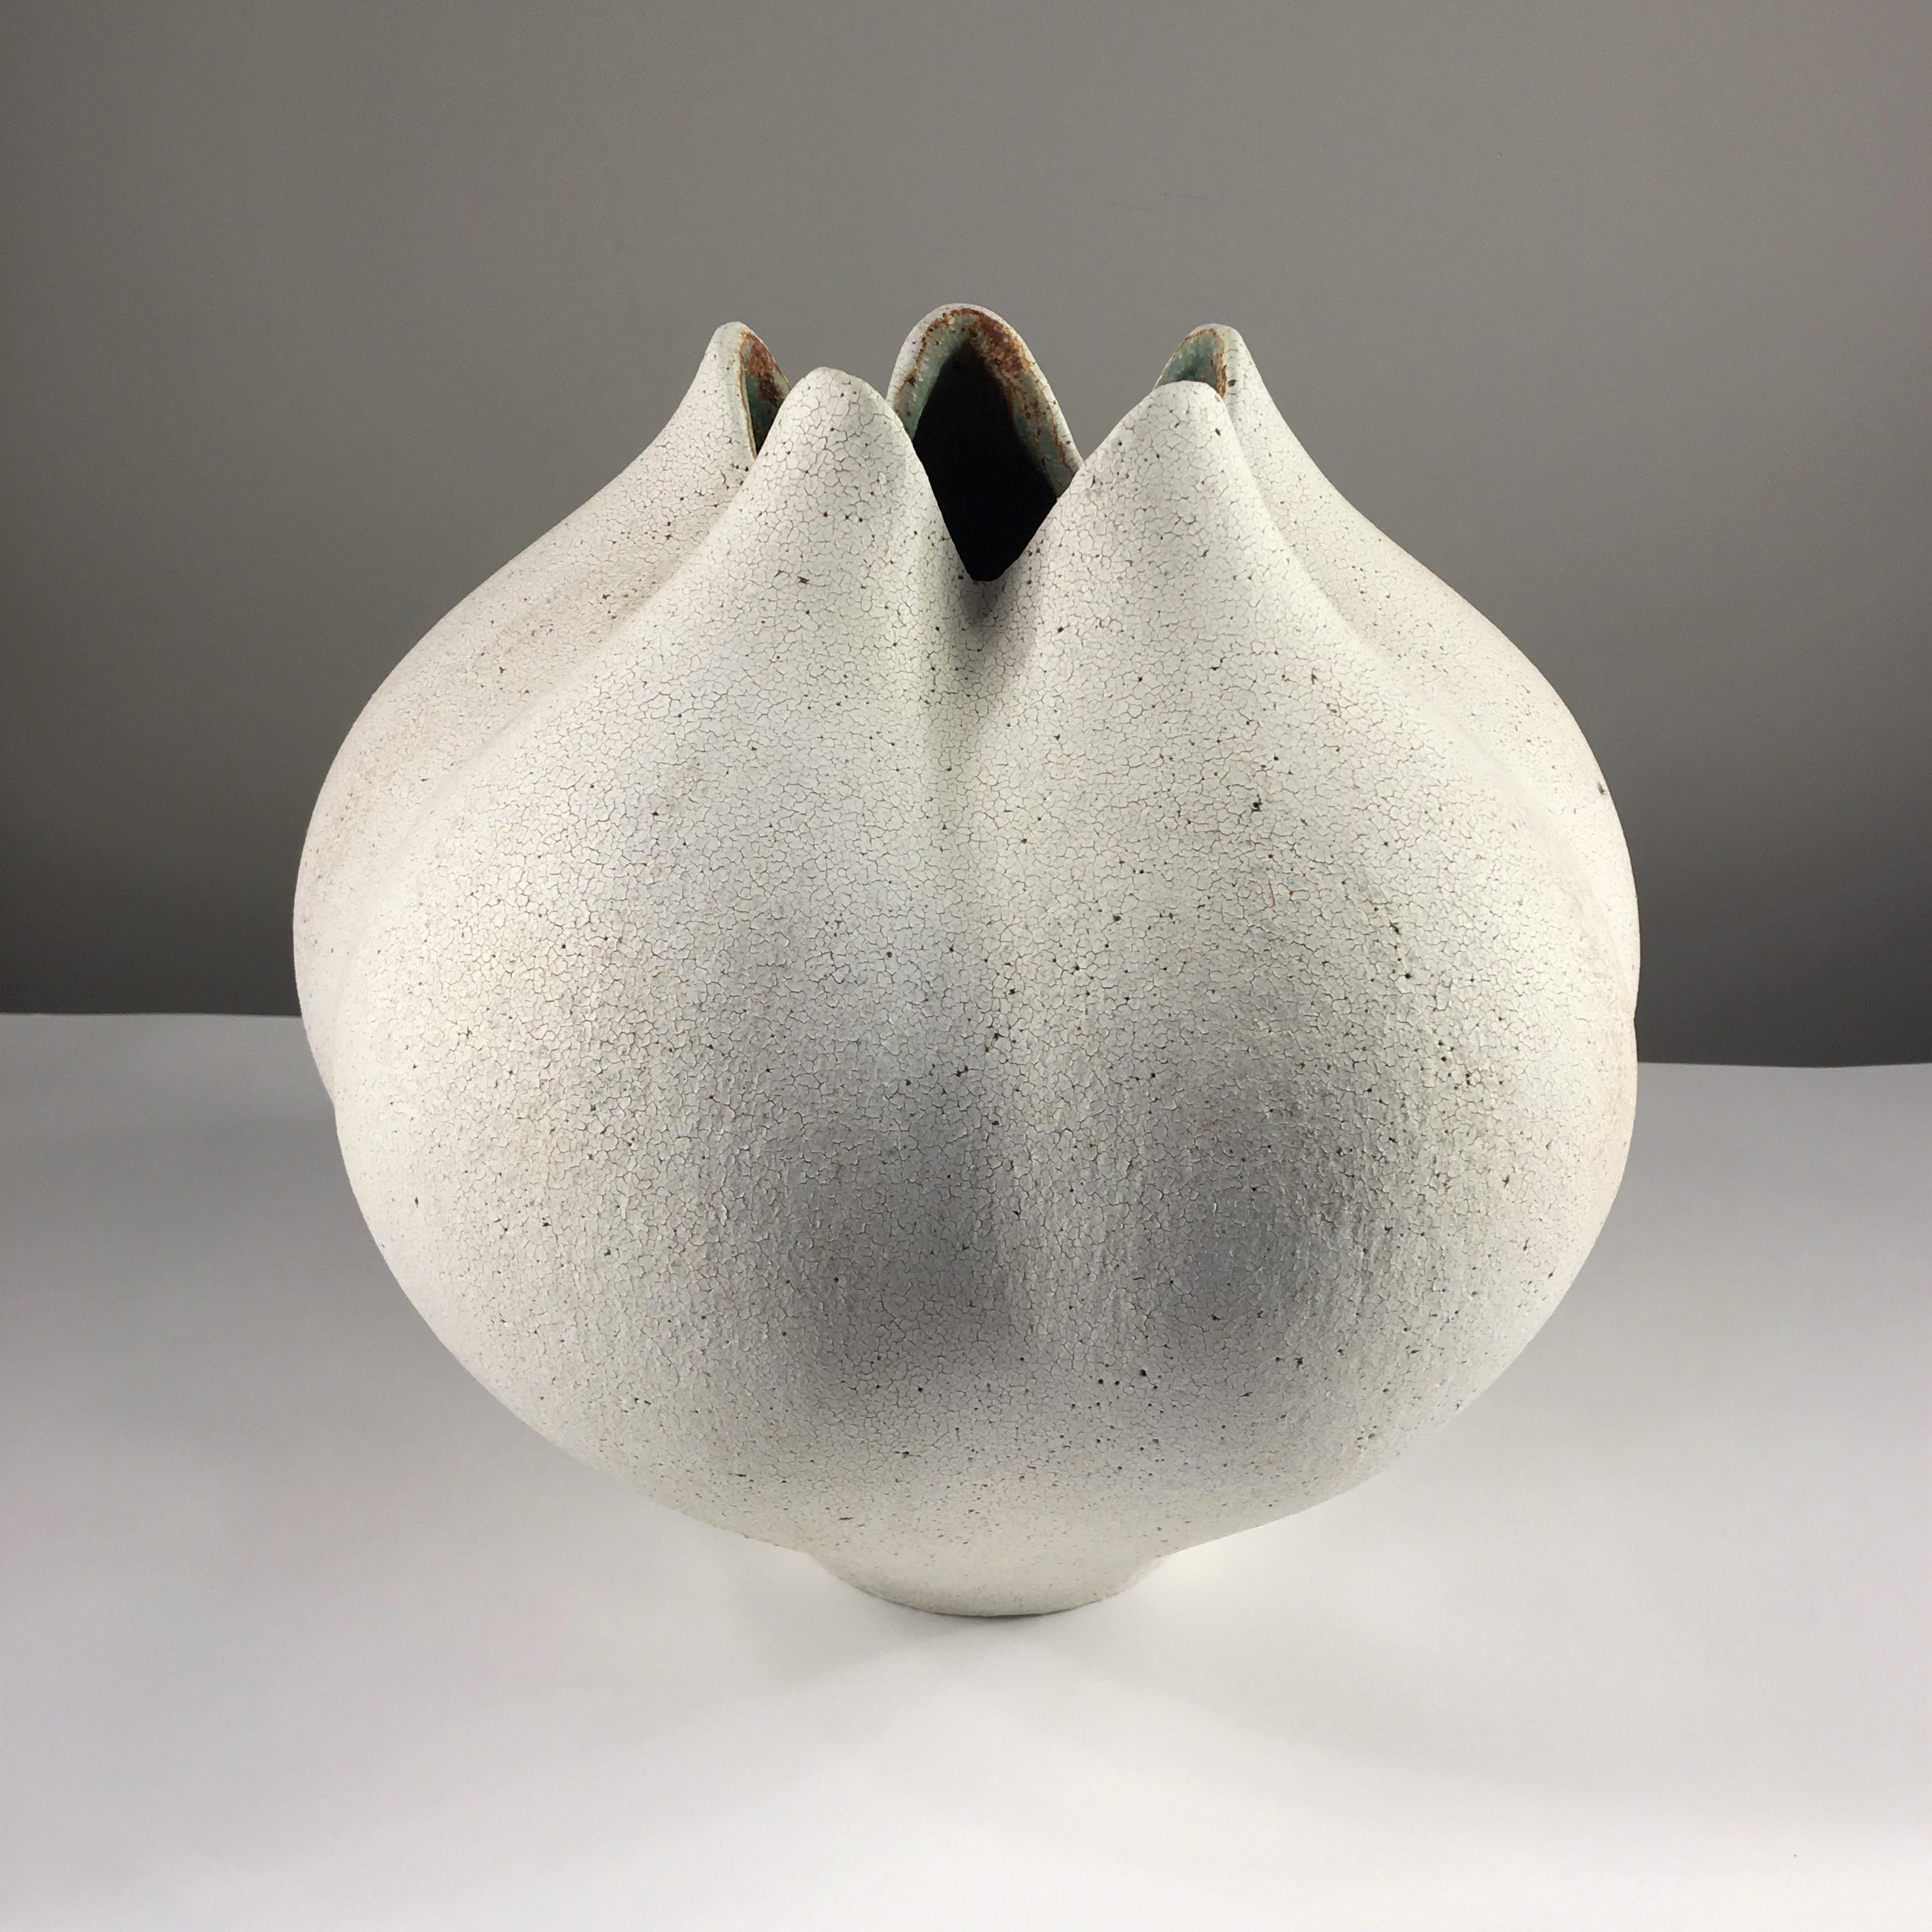 Round Ceramic Blossom Vase with Petals by Yumiko Kuga. Measures: Height 11